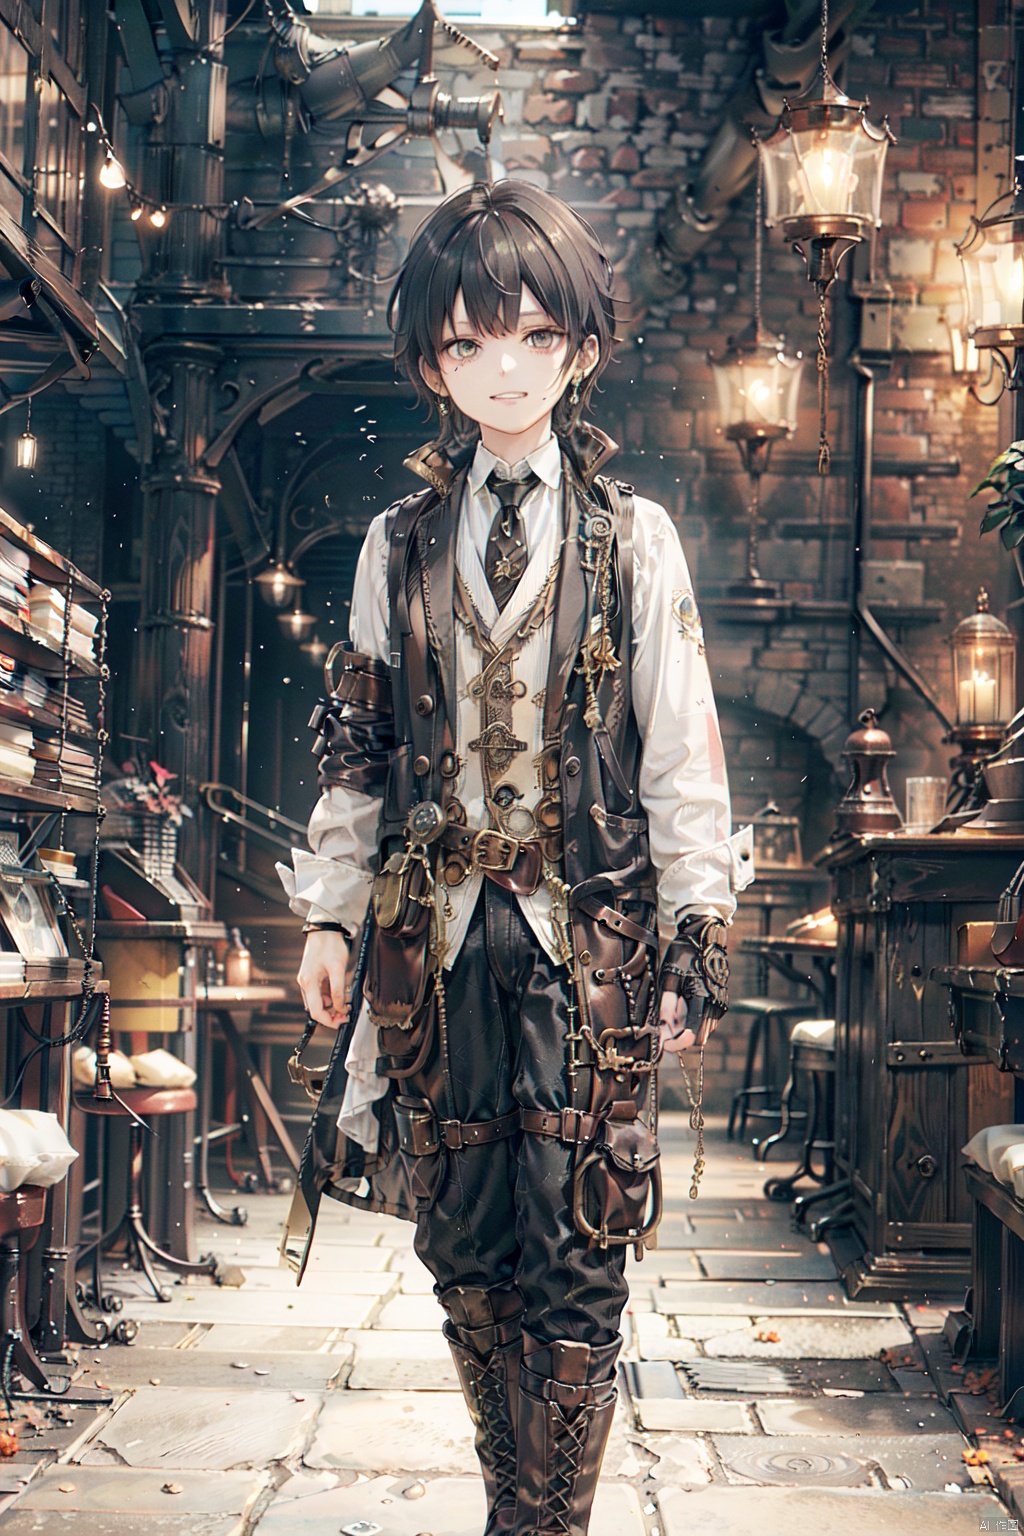  masterpiece,best quality,UHD,impossible clothes,****_male,detective,medieval, nai3, (\fan hua\), 1boy earrings,steampunk,black hair,white cardigan,white jabot,english text,fume,hair slicked back,evil,evil grin,peril,grey vest,grey eyes,glowing eyes,ray tracing,fog,exhaust,beam,black windbreaker,magnifying glass,suit jacket,blazer,cane,library,leather boots,leather gloves,black belt,watch,steampunk, 1boy earrings, supersteampunk